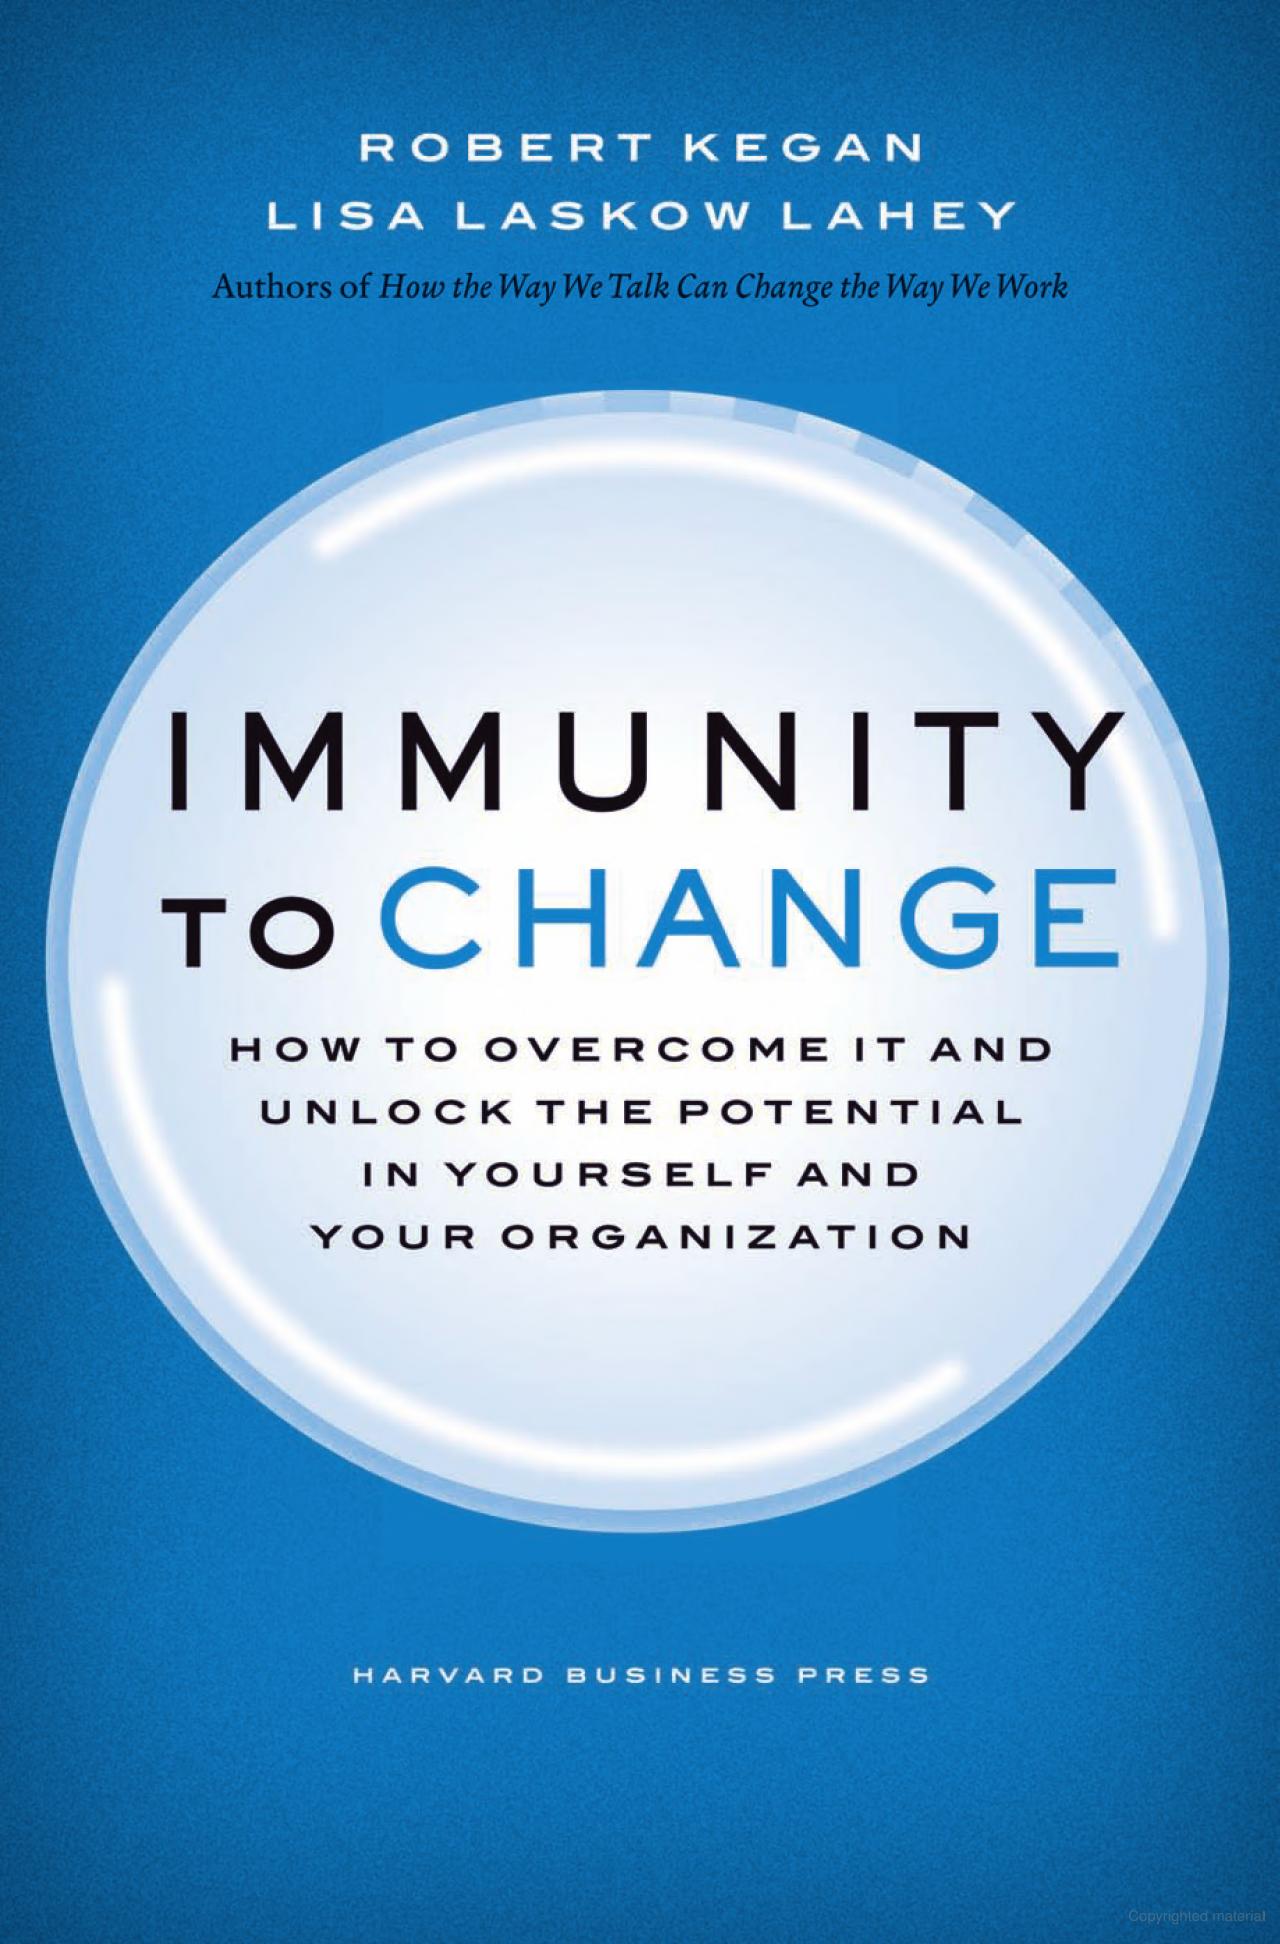 Thoughts and Quotes from “Immunity to Change” by Robert Kegan